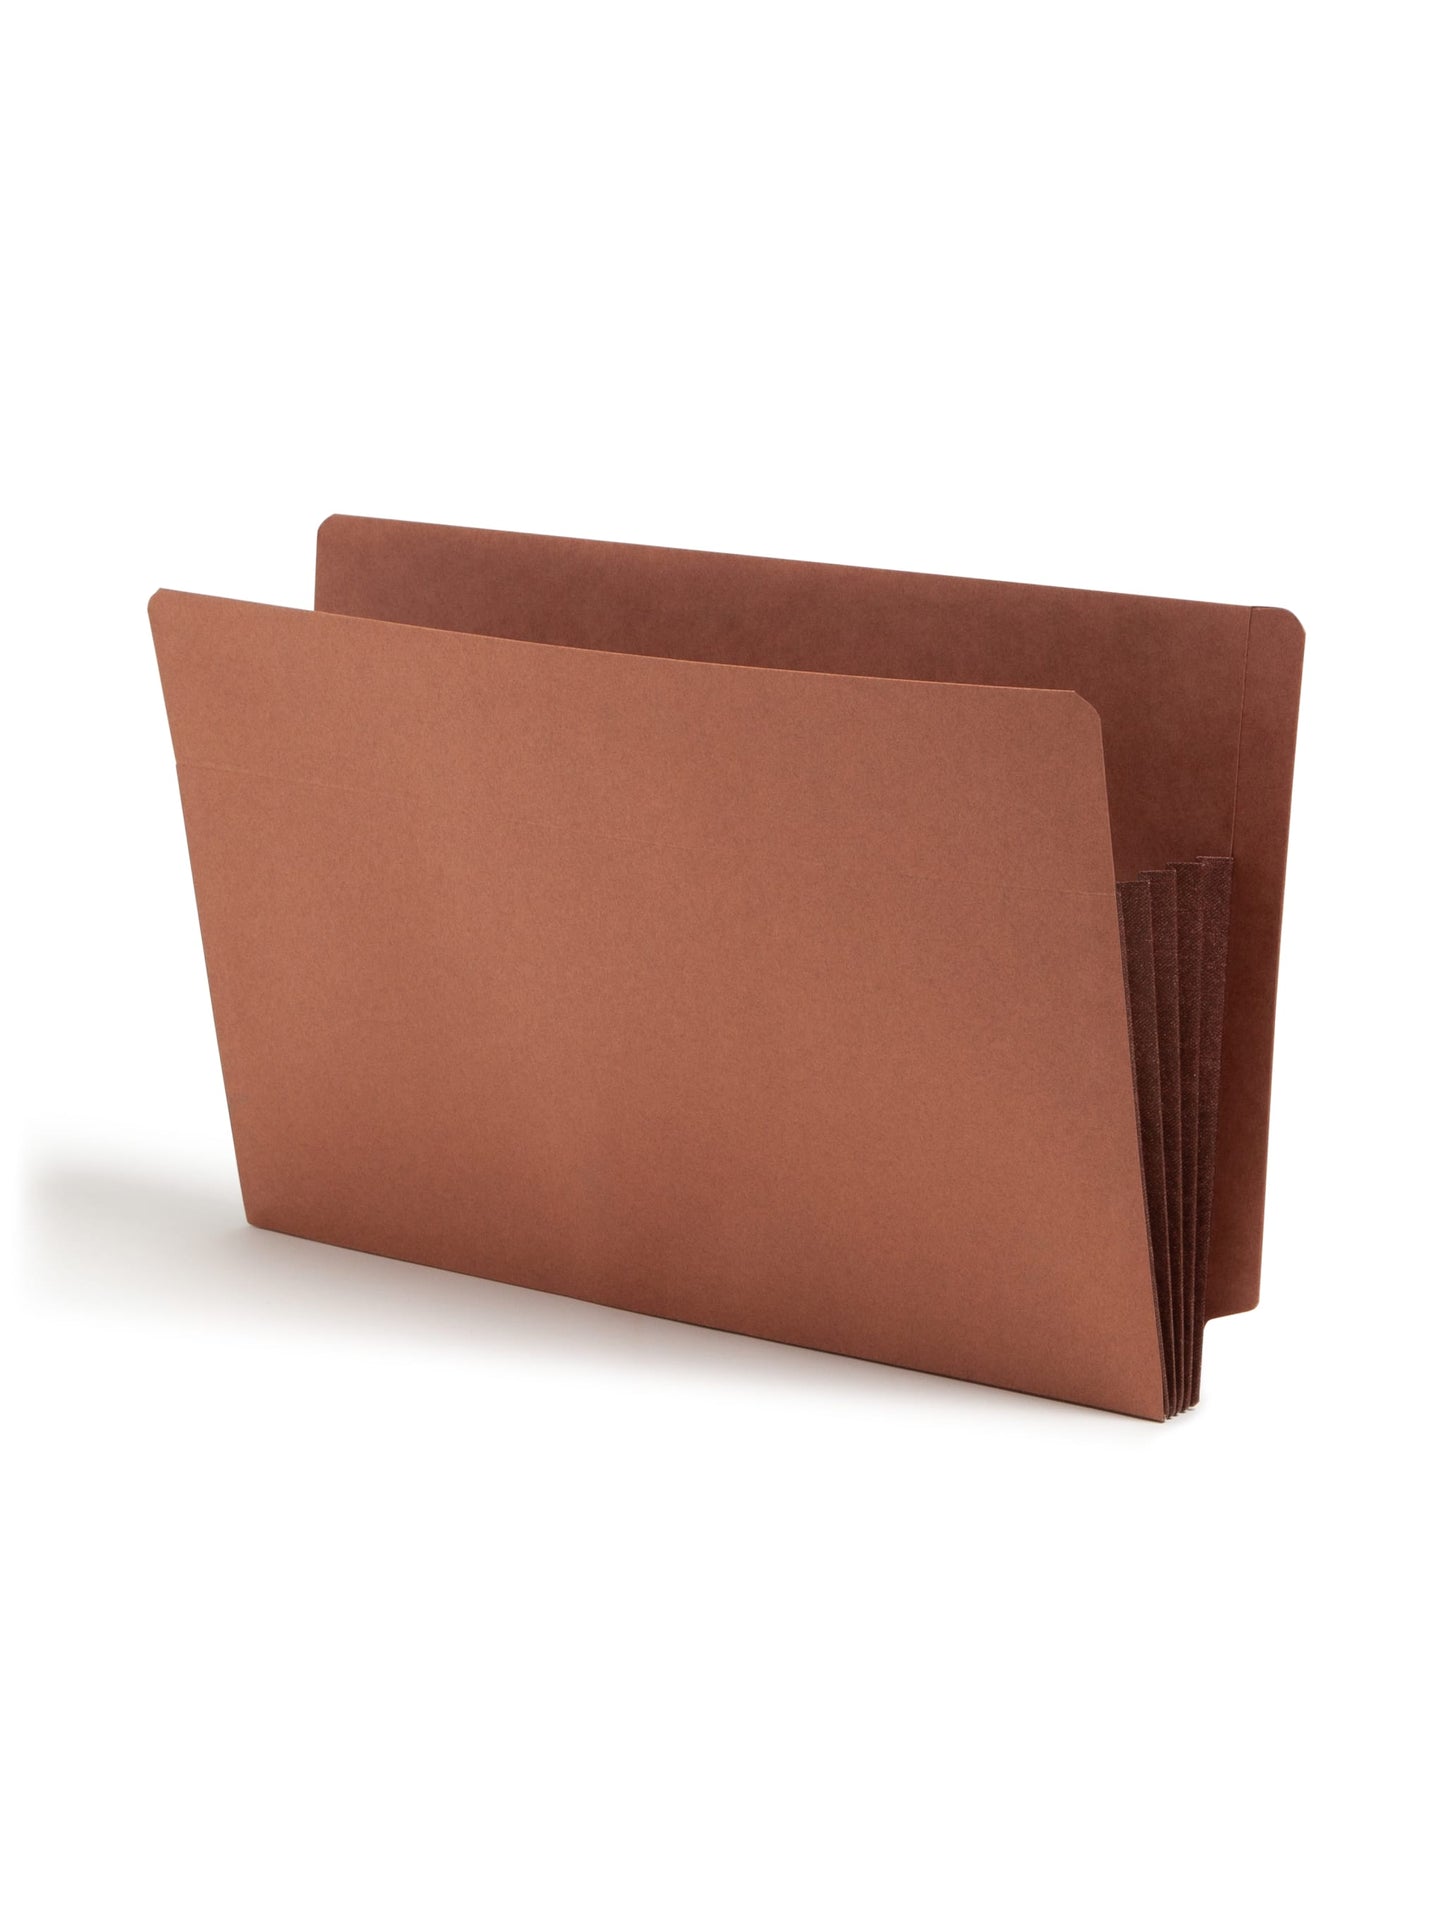 Reinforced End Tab File Pockets, Straight-Cut Tab, 3-1/2 inch Expansion, Dark Brown Color, Extra Wide Legal Size, Set of 0, 30086486746817